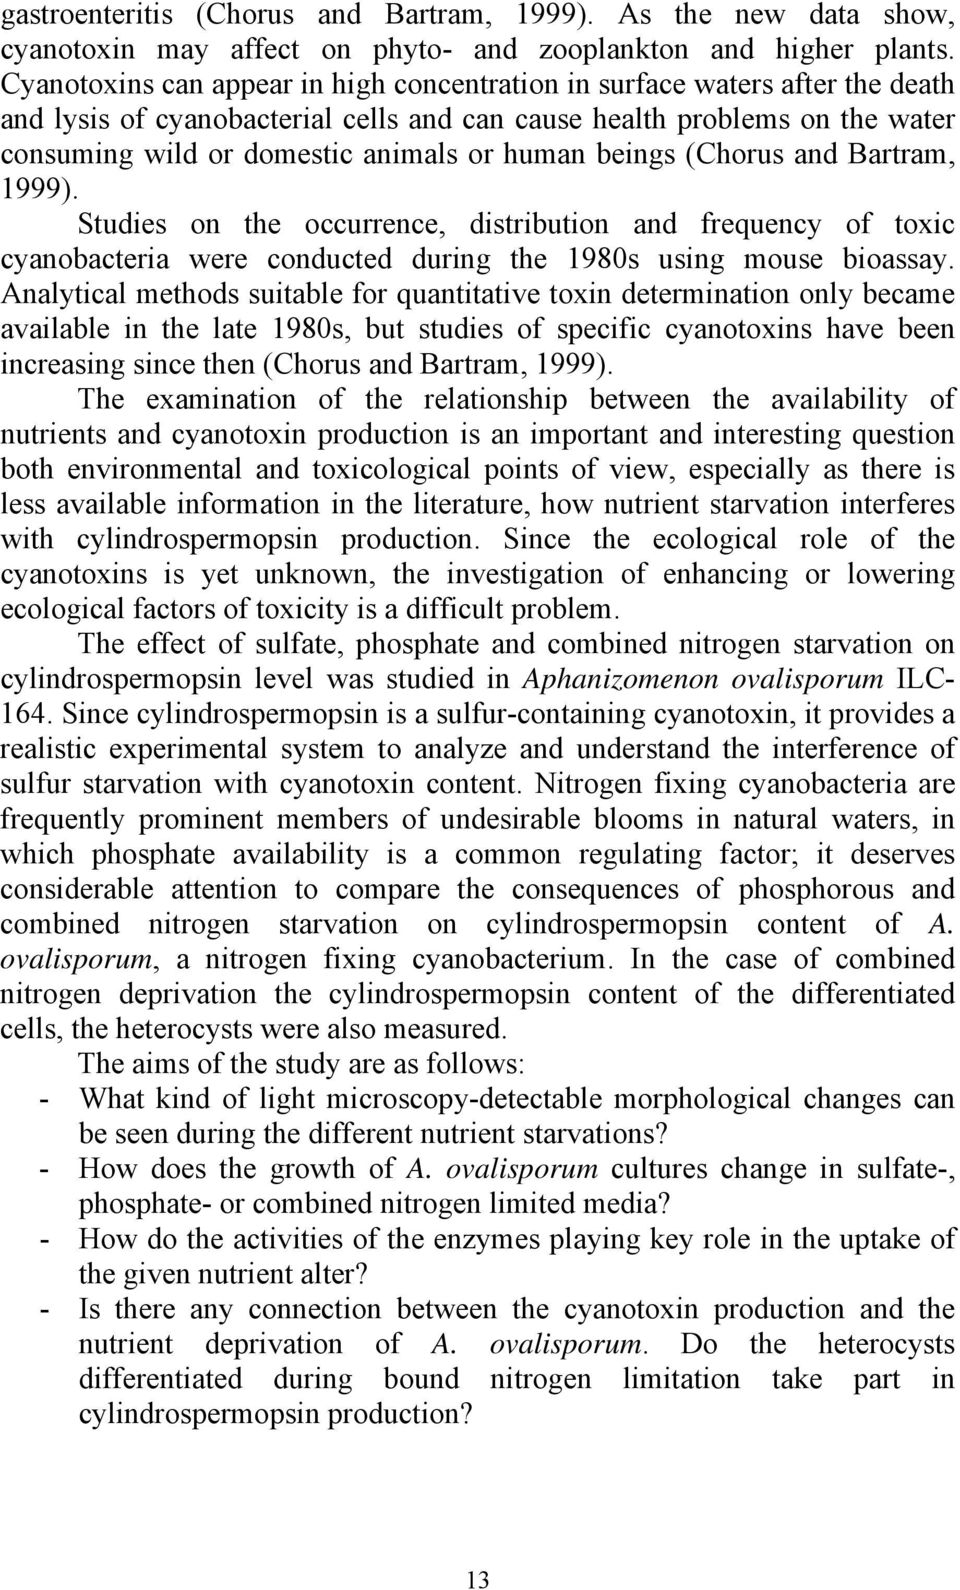 beings (Chorus and Bartram, 1999). Studies on the occurrence, distribution and frequency of toxic cyanobacteria were conducted during the 1980s using mouse bioassay.